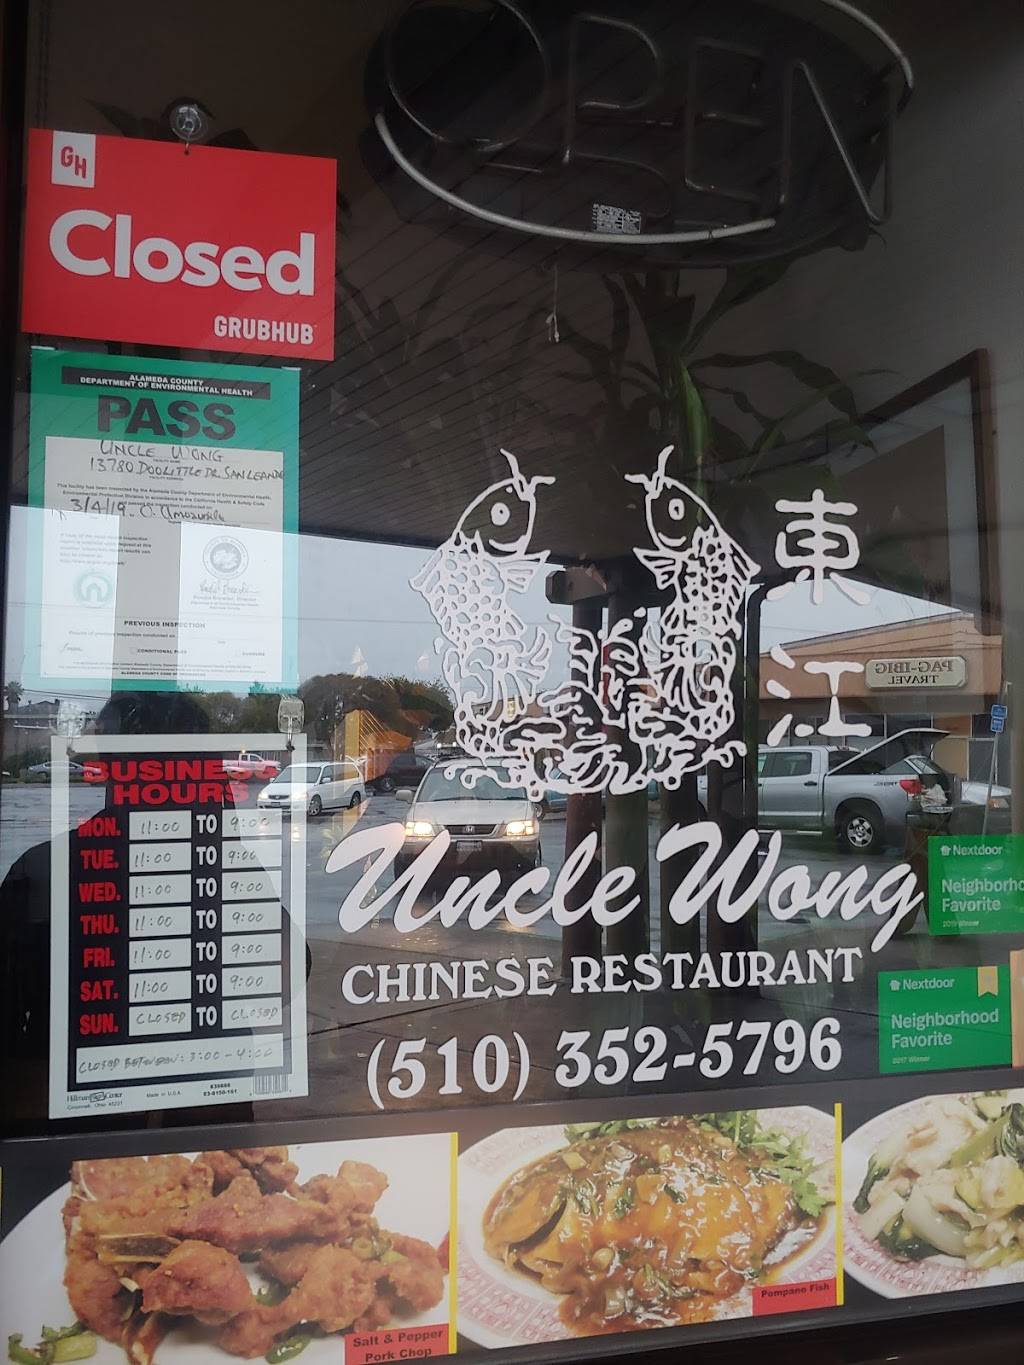 uncle wong chinese restaurant | restaurant | 13780 Doolittle Dr, San Leandro, CA 94577, USA | 5103525796 OR +1 510-352-5796